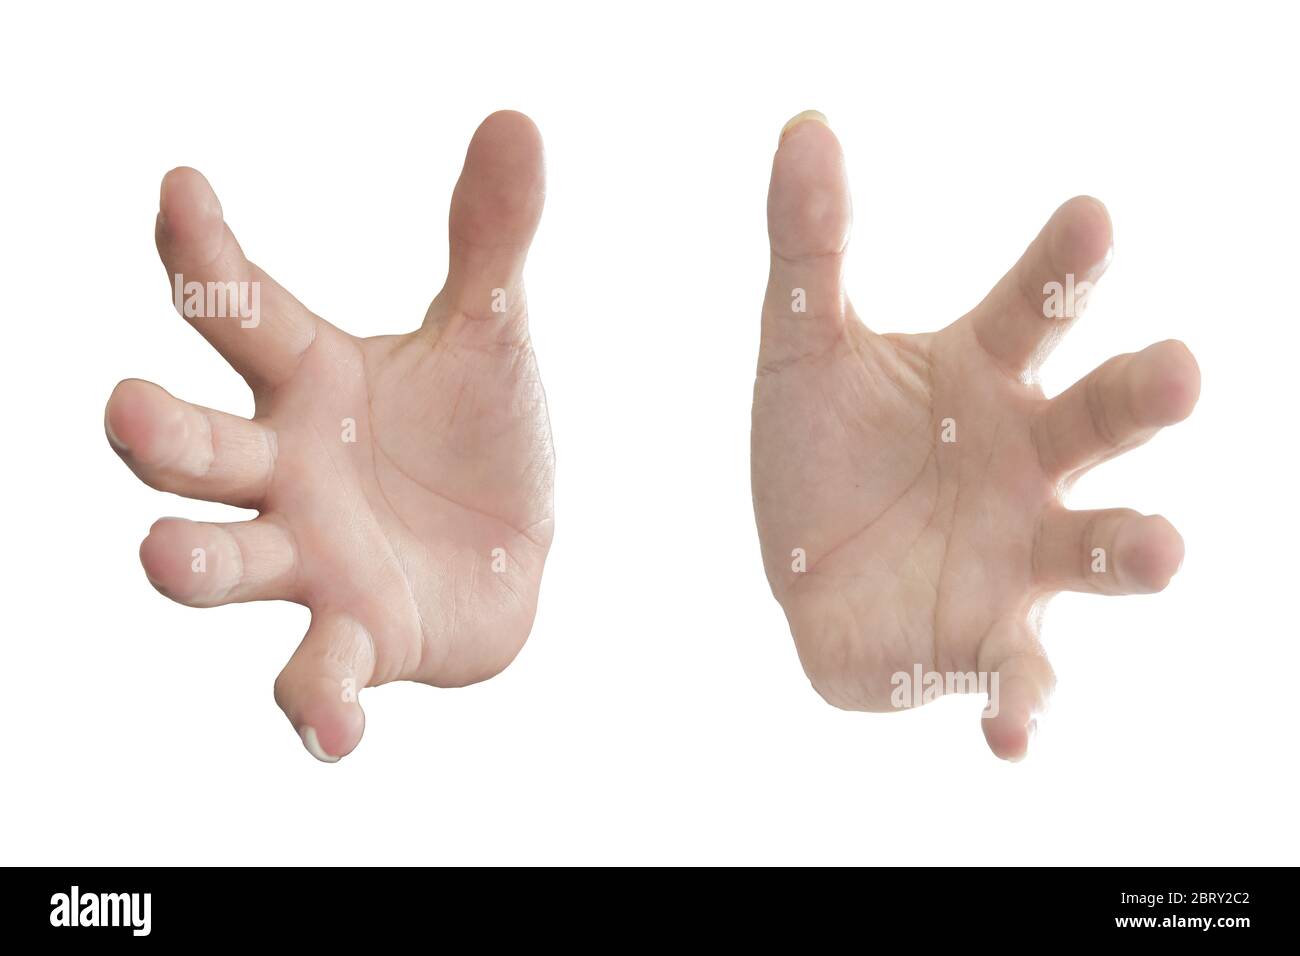 Human hand gestures showing isolated on white background Stock Photo